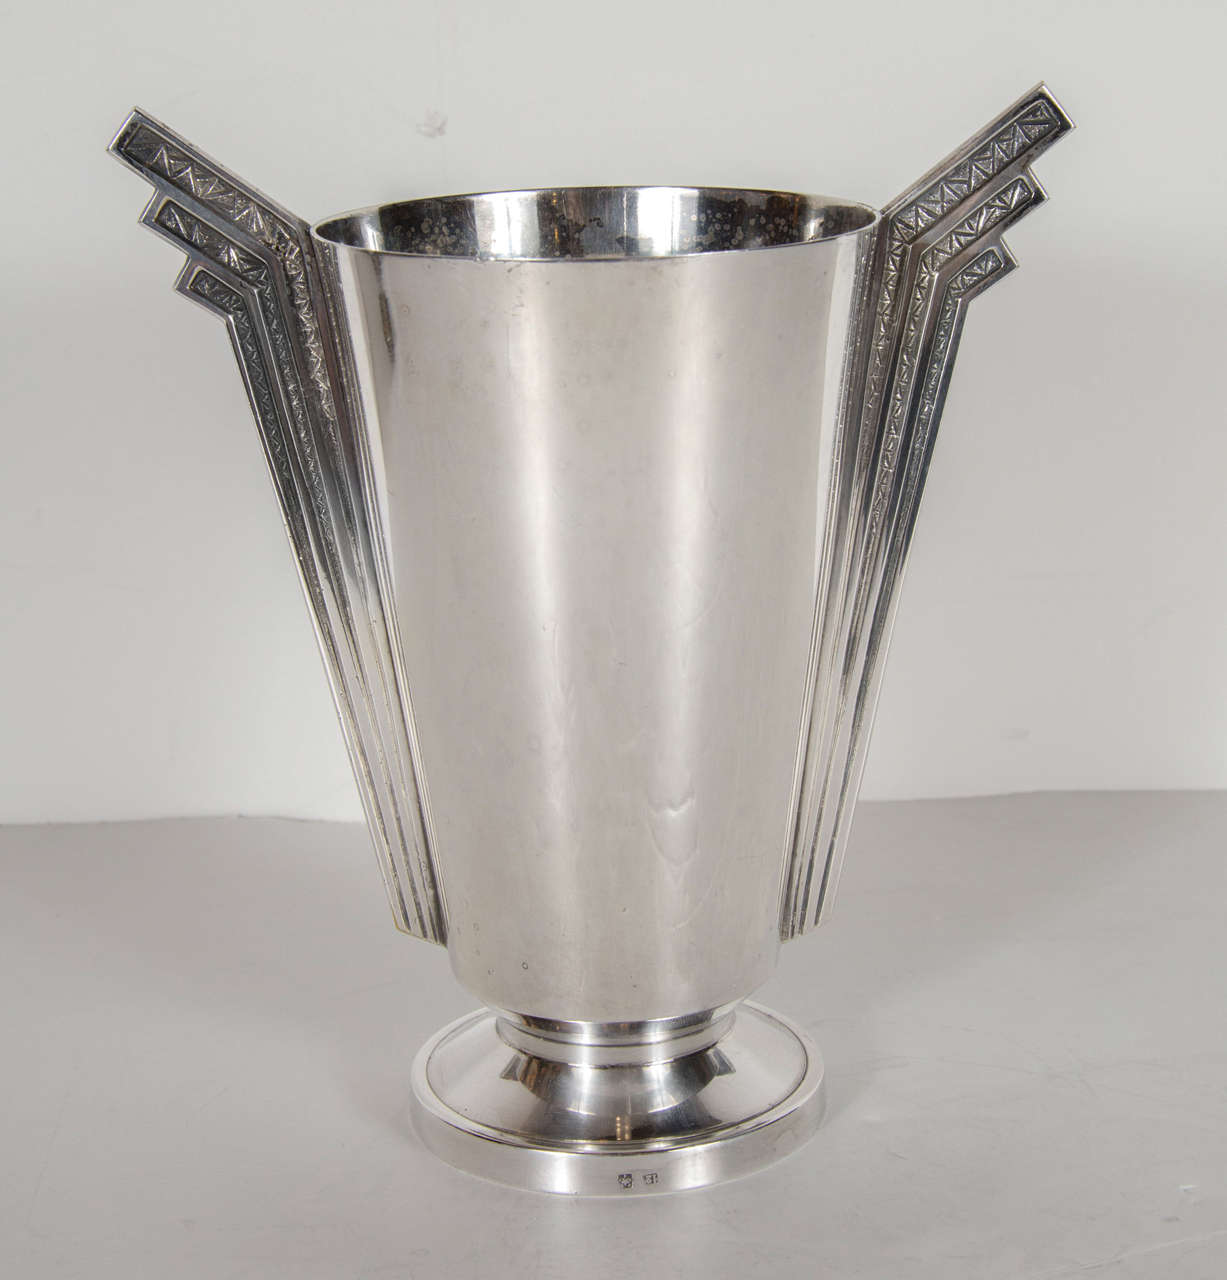 This stunning vase features a skyscraper style stylized handled silver plate vase with hand-forged cross hatch detailing.